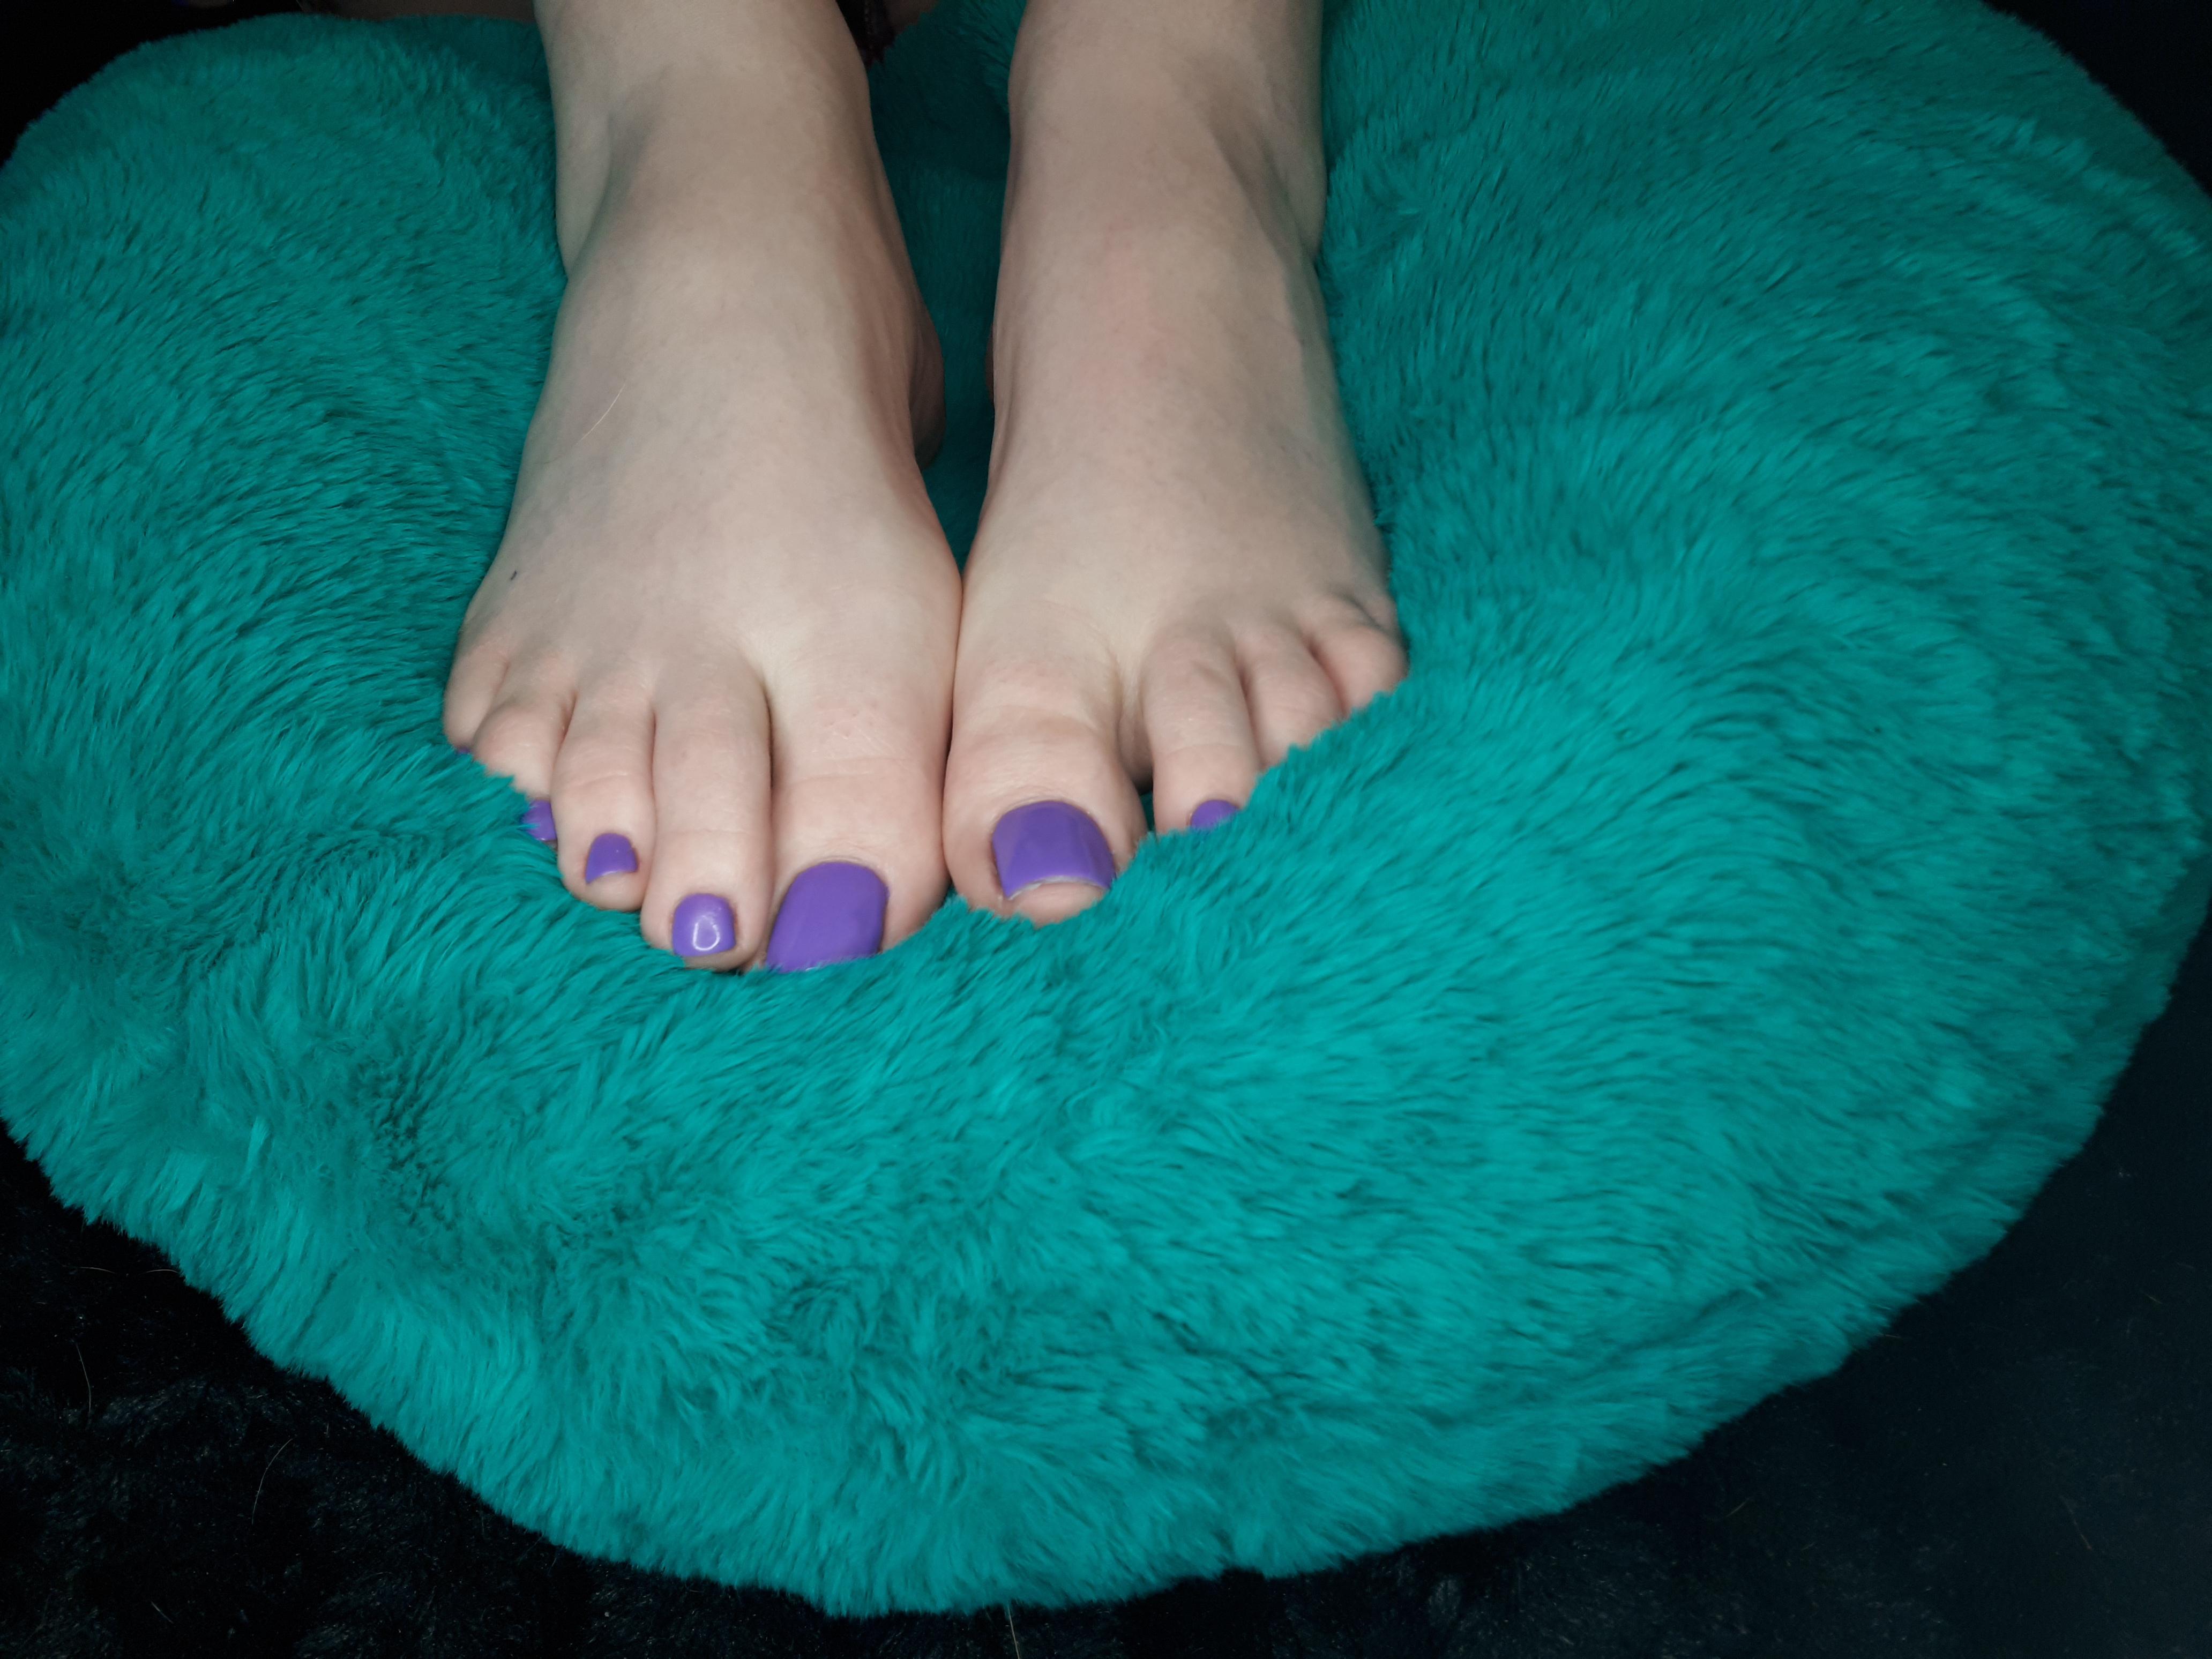 Just A Trans Girl Just Showing Off Her Feet Scrolller